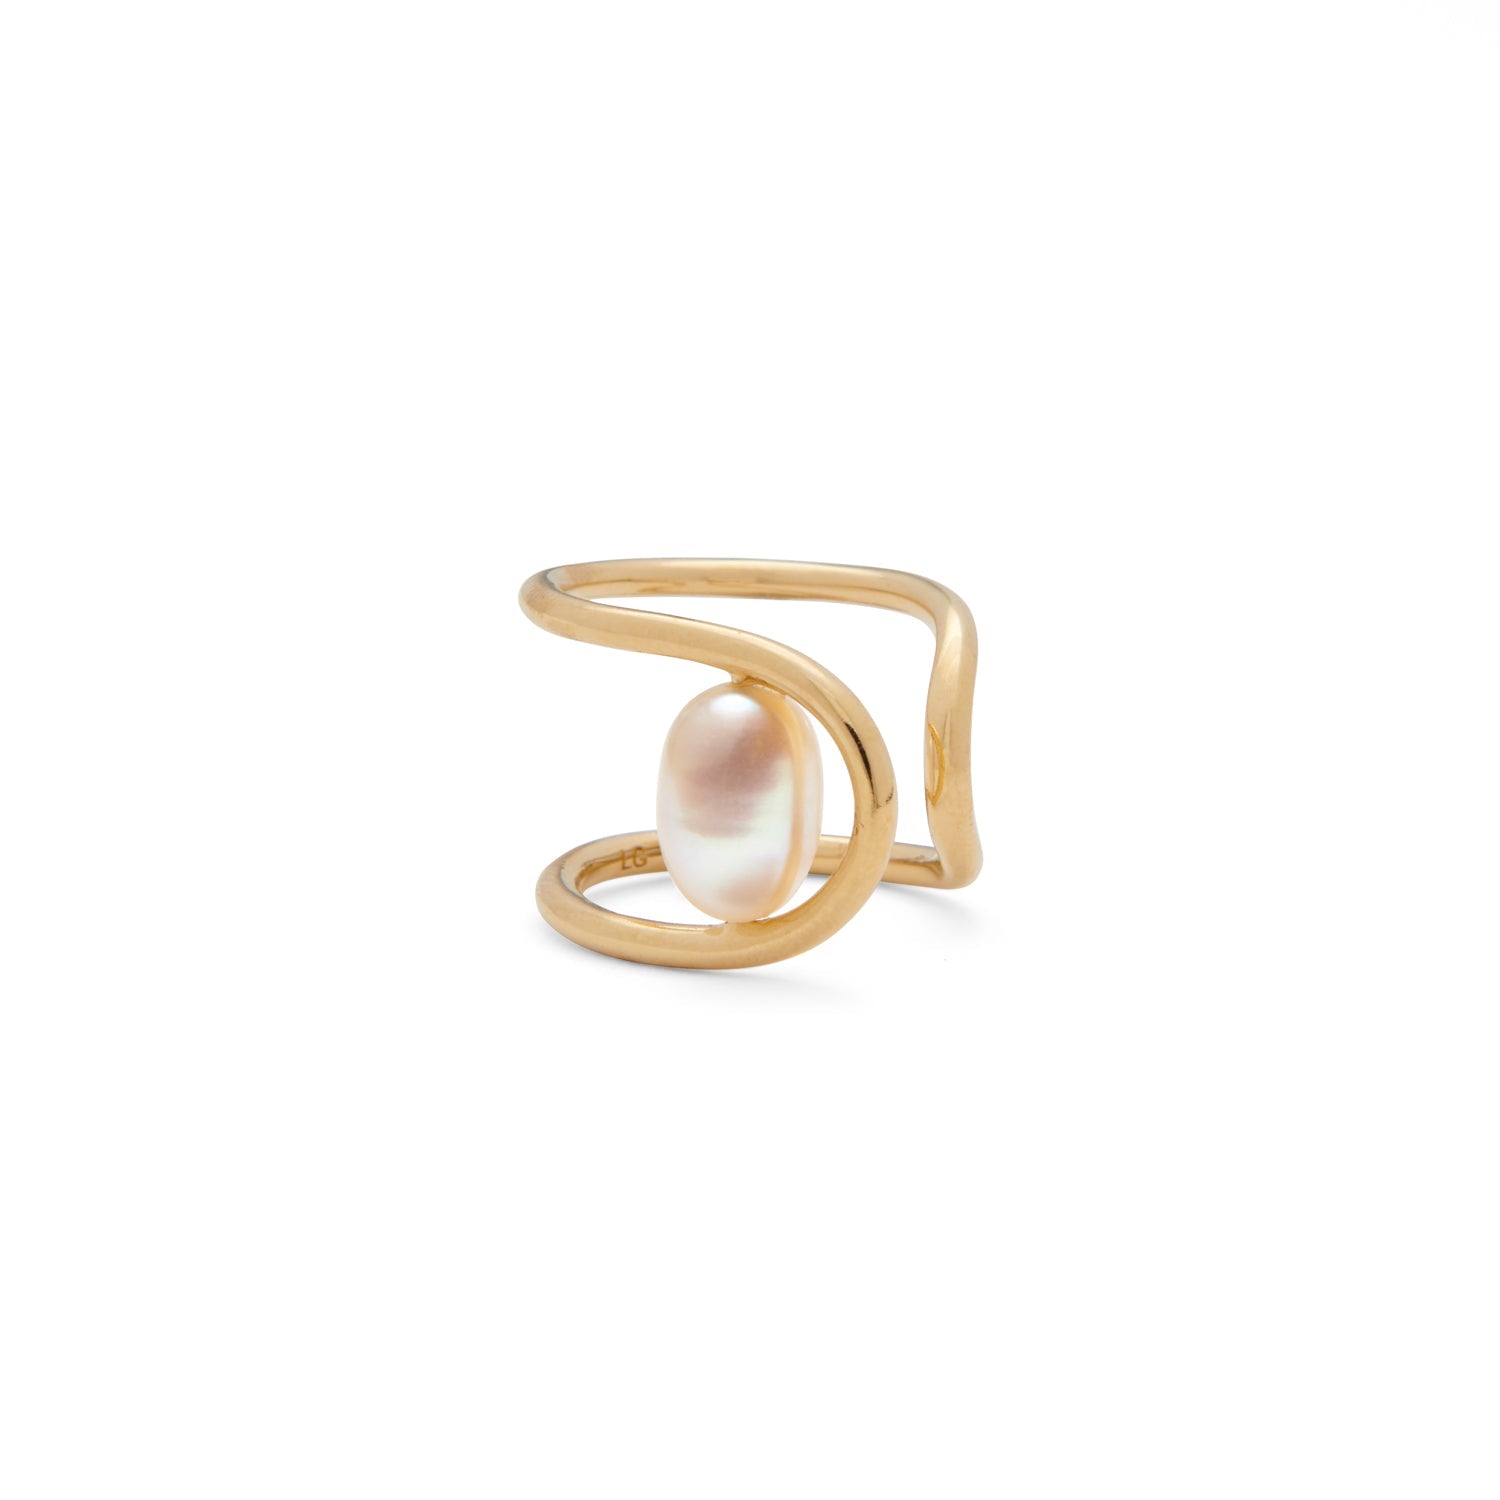 Pearl Swerve Ring - Gold - The Crowd Went Wild